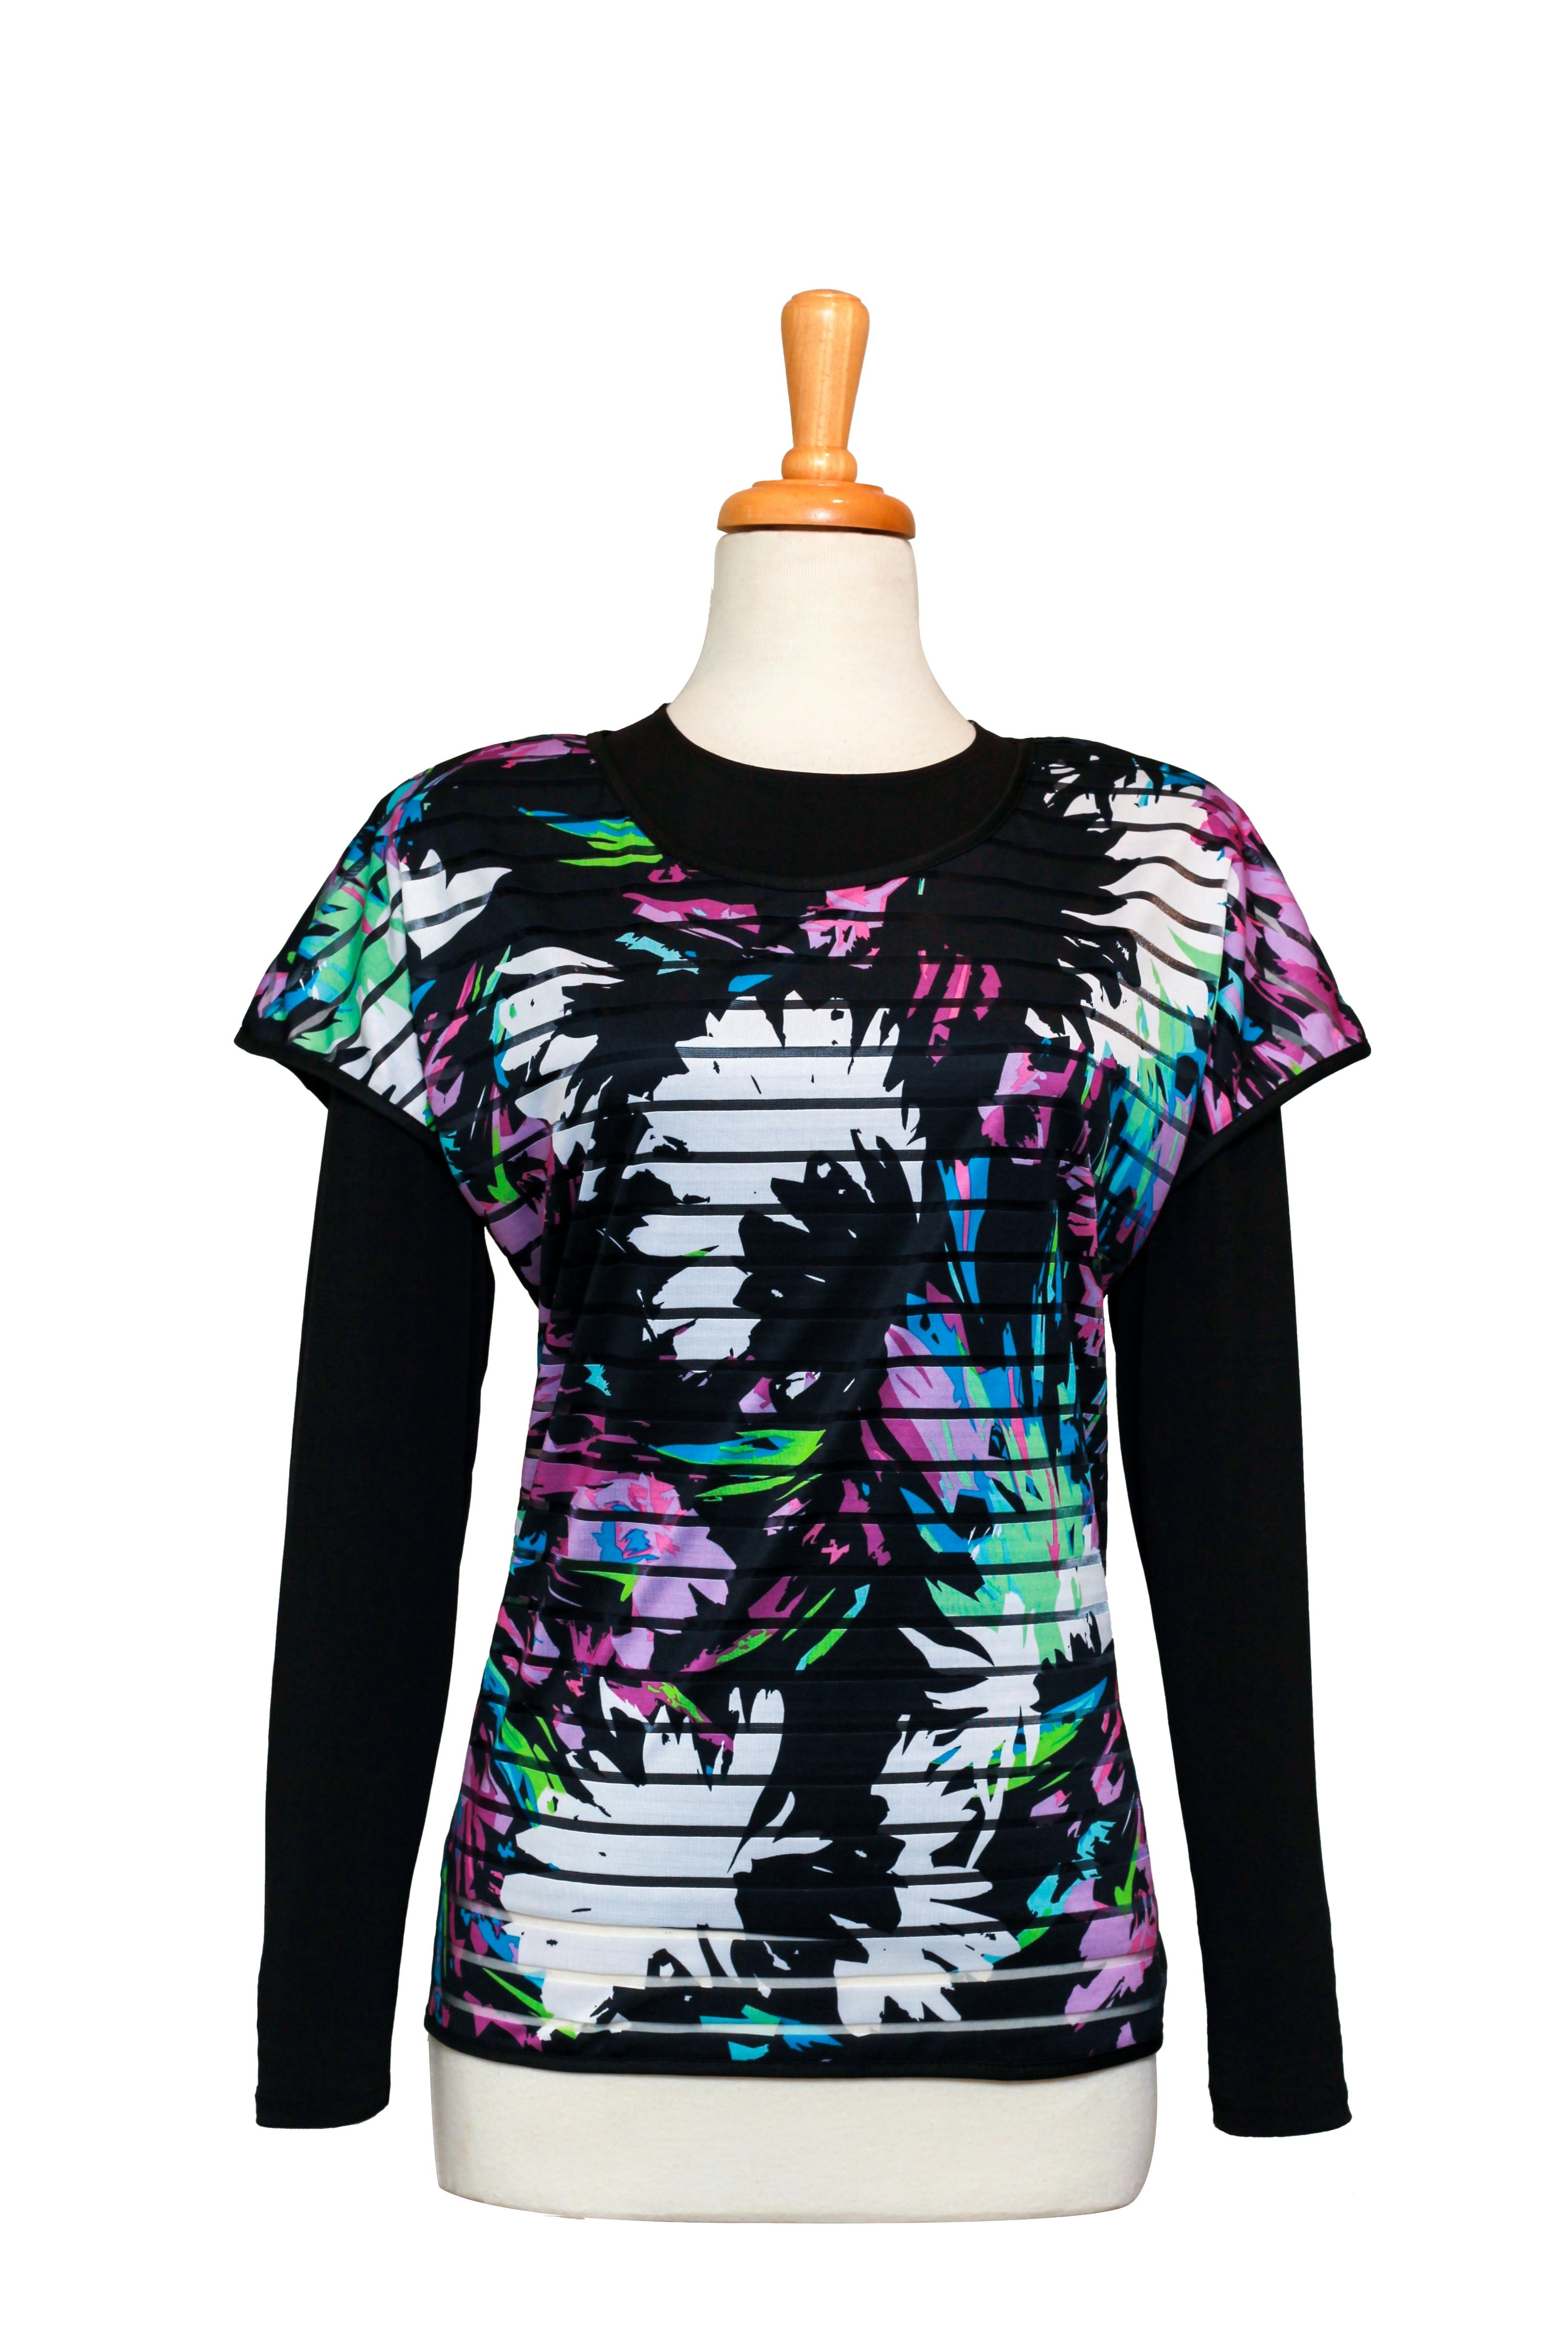 Multi Color Tropical Short Sleeve With Black Long Sleeve Microfiber Top